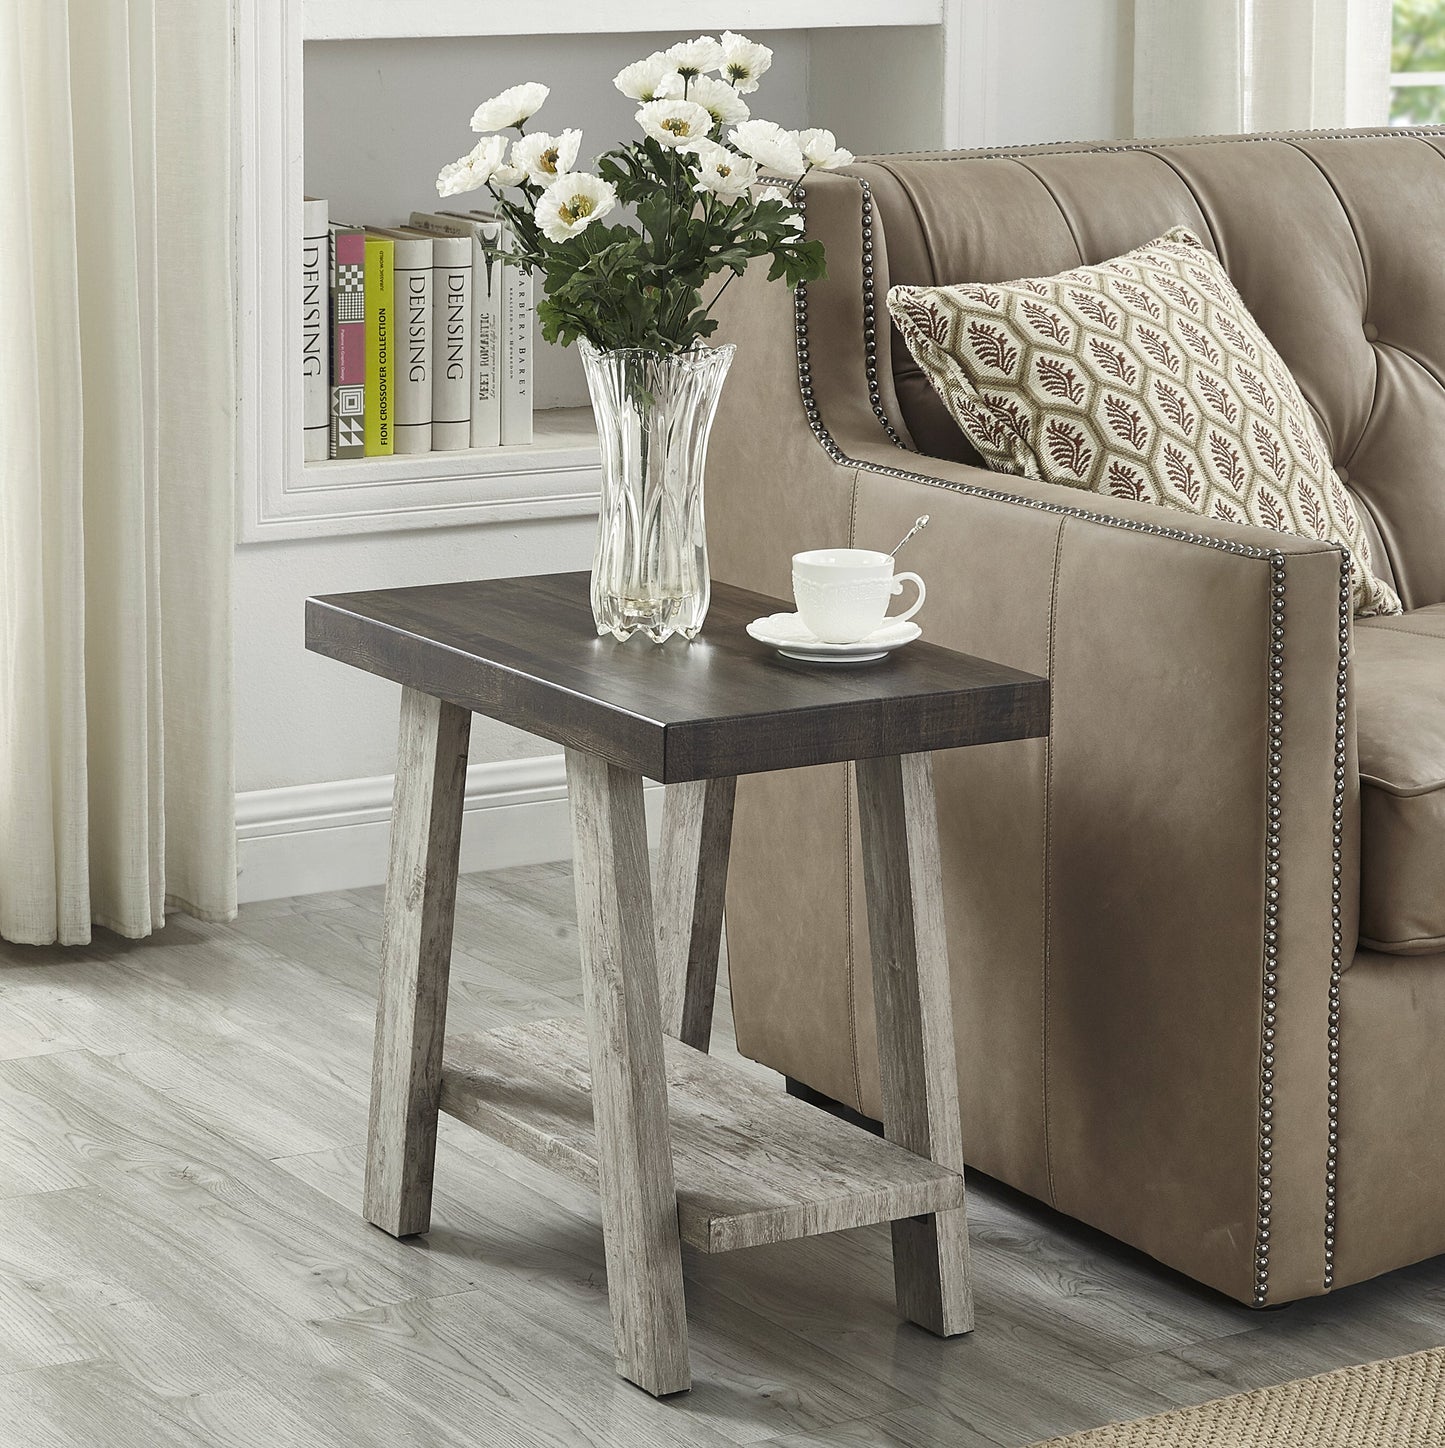 Athens Contemporary Two-Tone Wood Shelf Side Table in Weathered Walnut and Gray